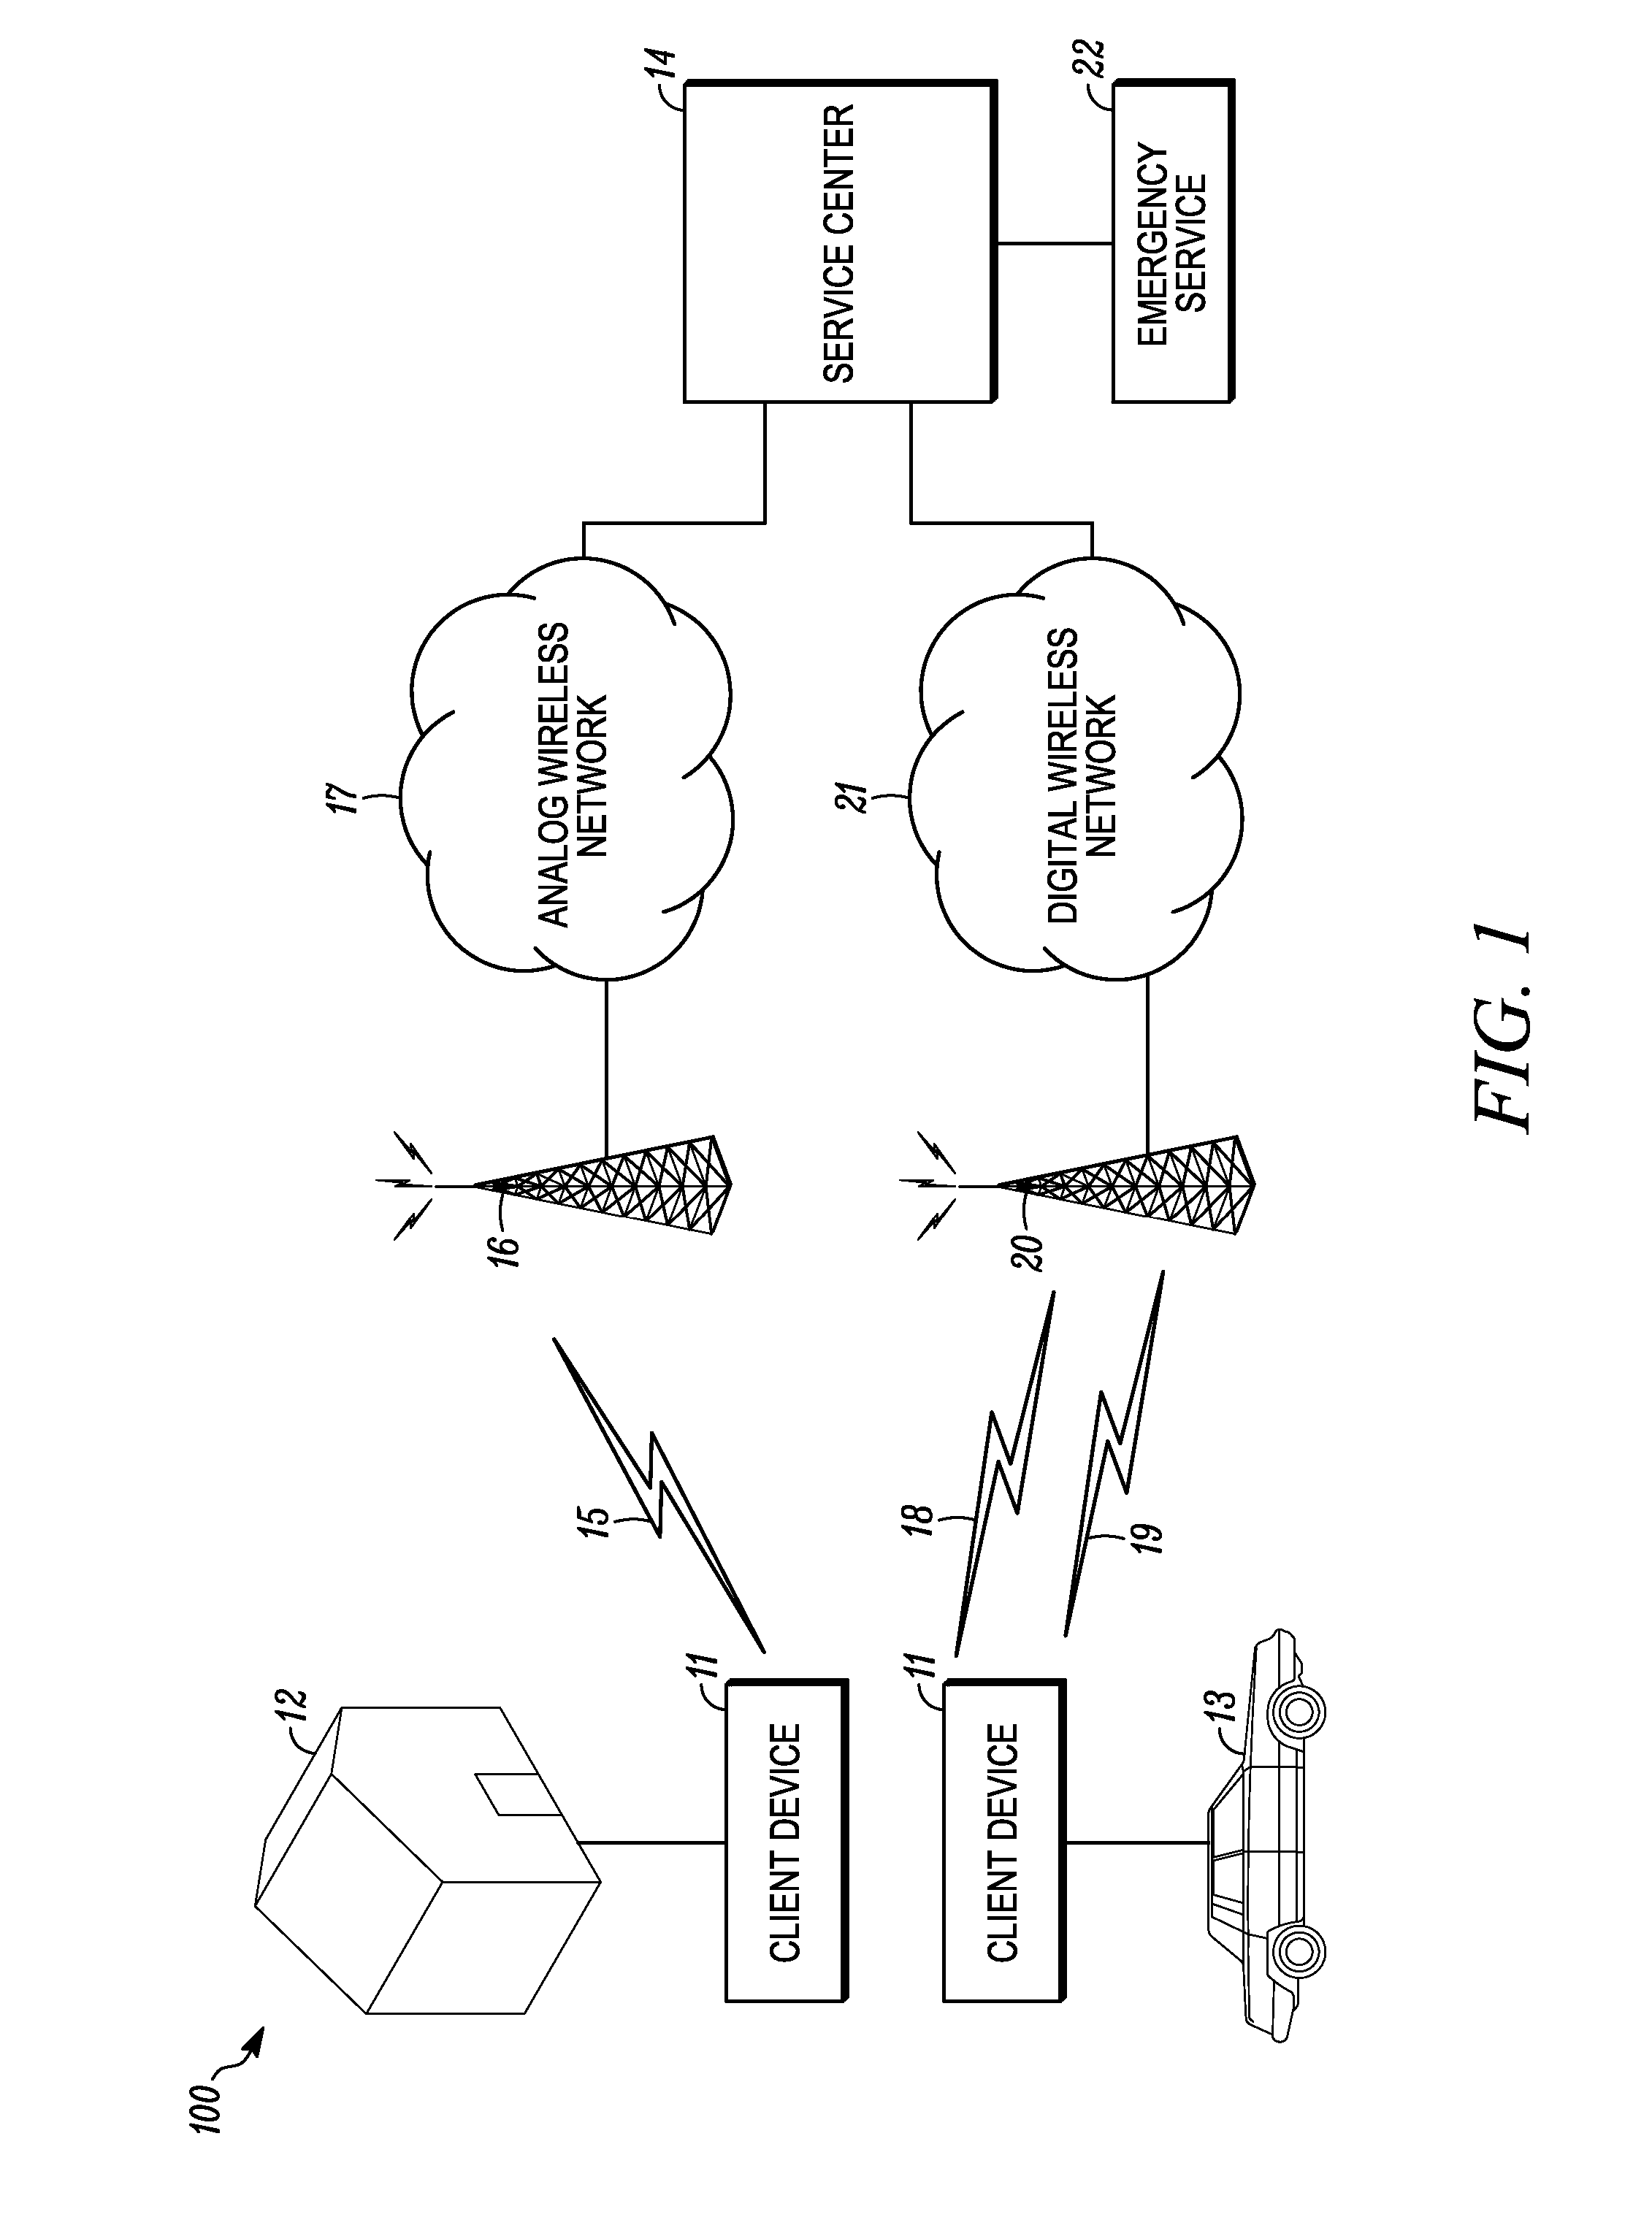 System and method for initiating an emergency call from a device to an emergency call processing system